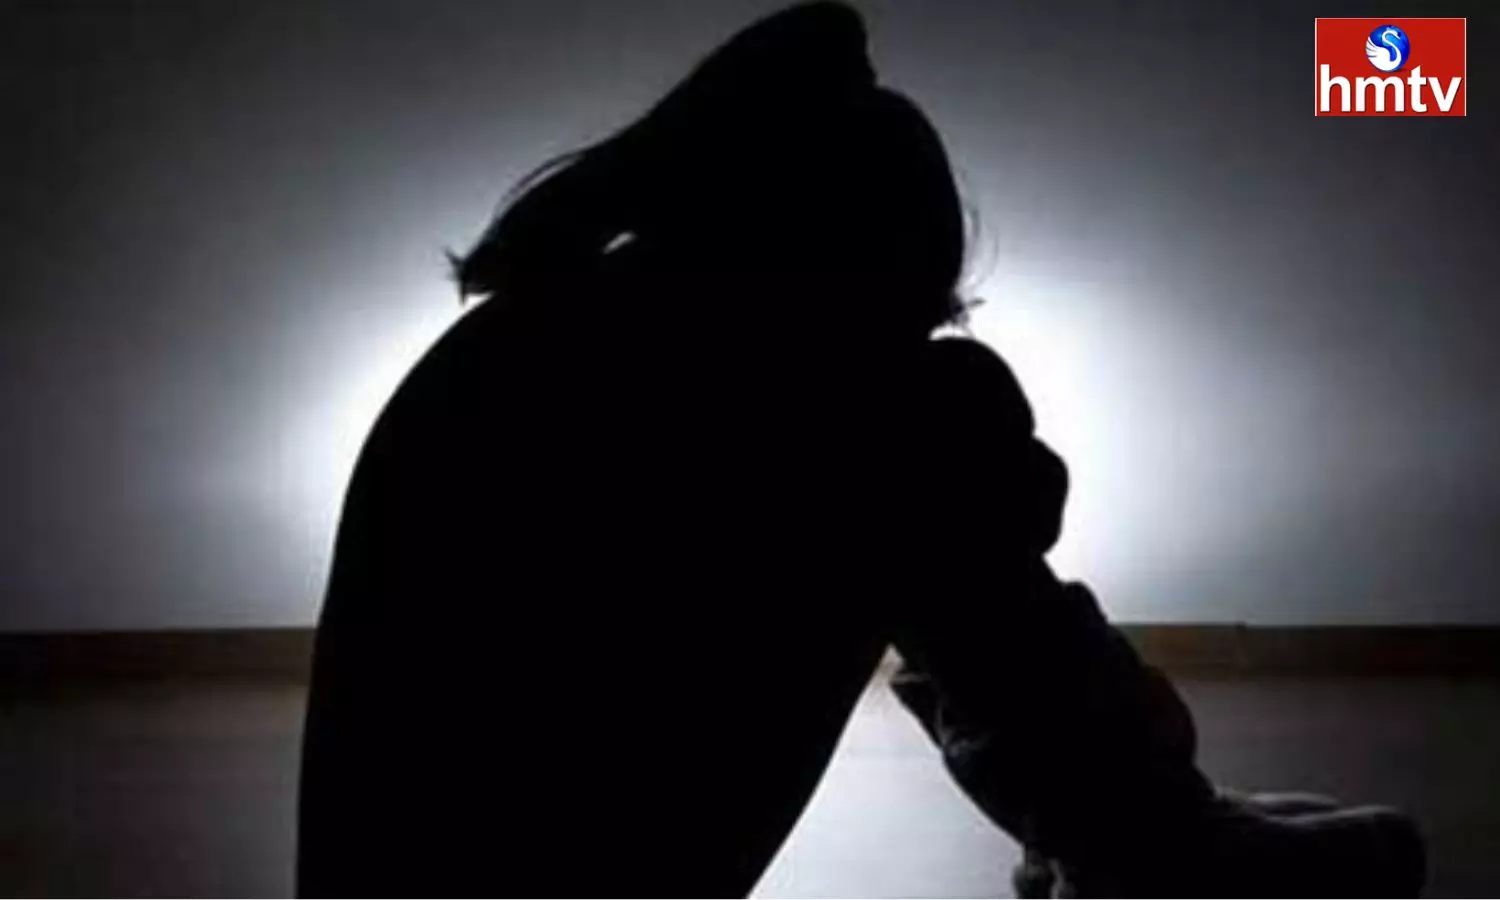 Unable to bear the Torture of the Volunteer, the Girl Attempted Suicide in Palnadu